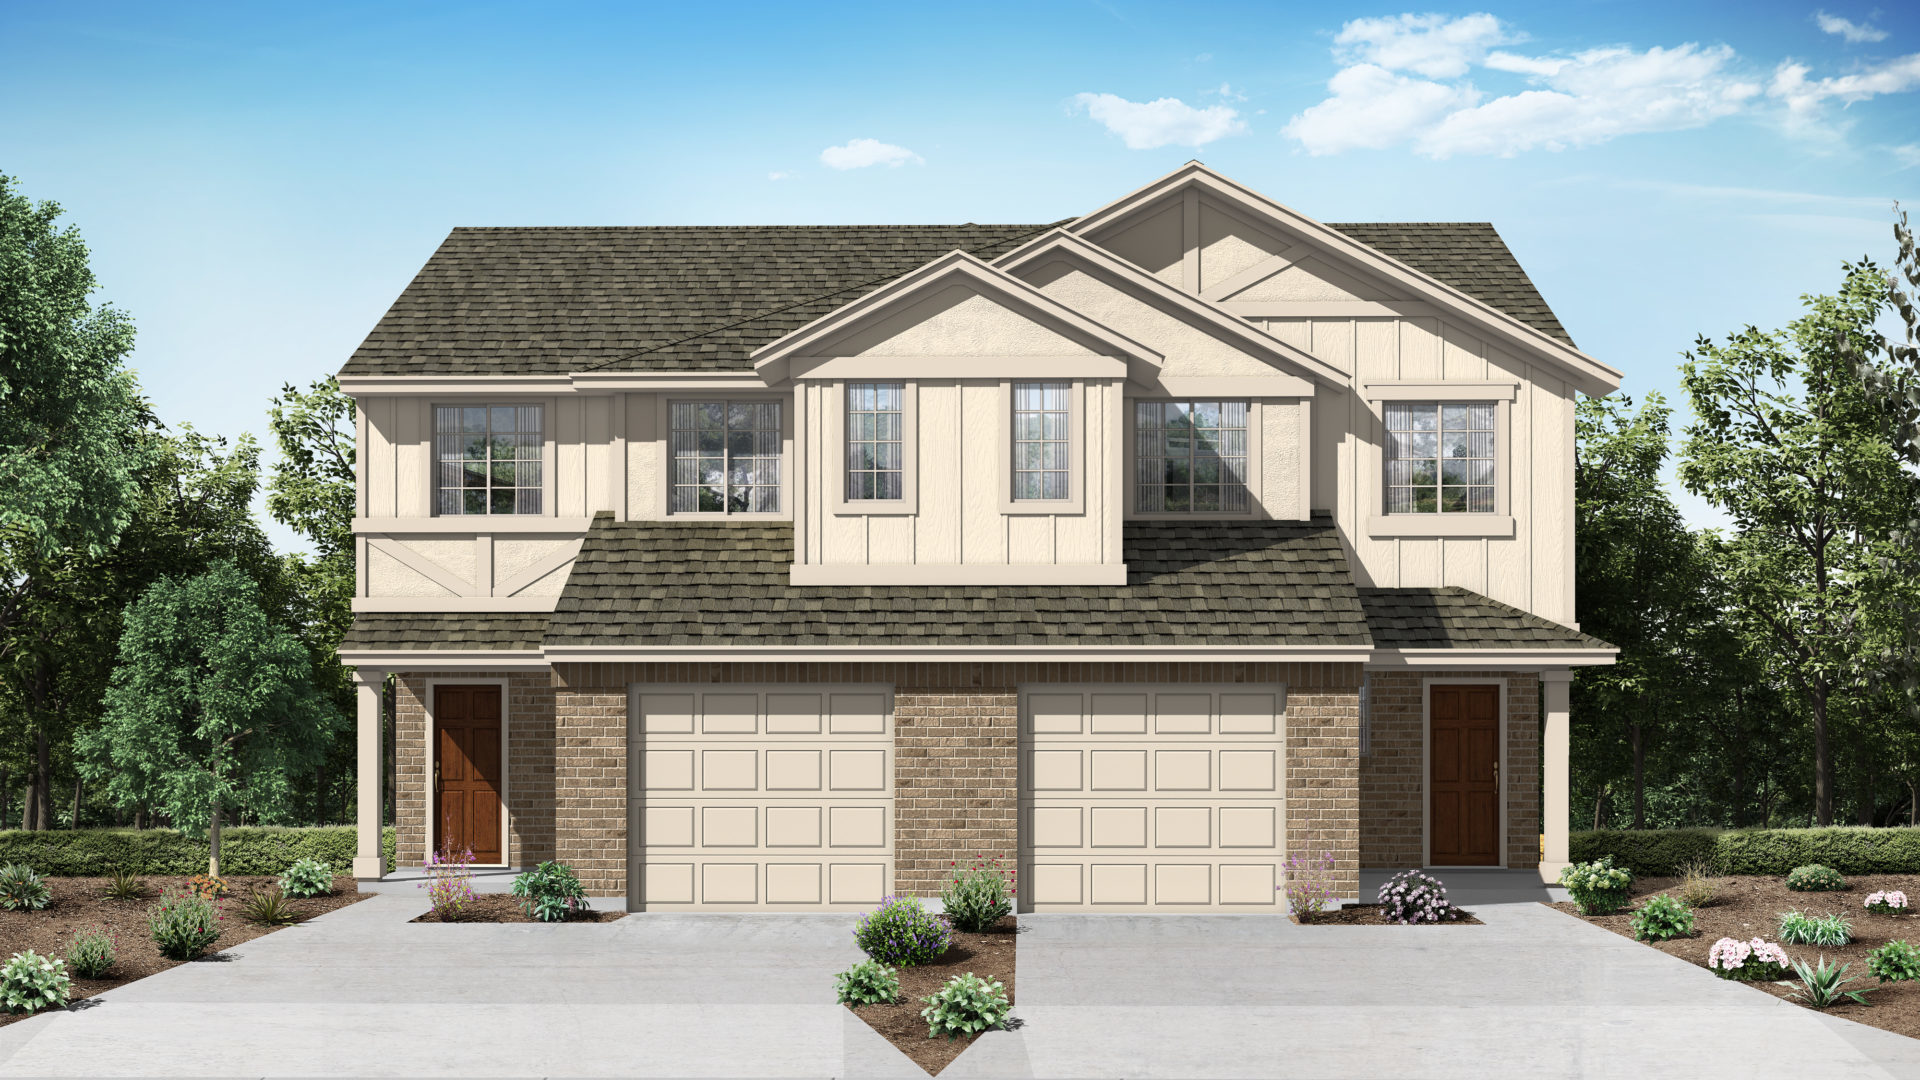 The Shasta Elevation A With Masonry Saddle Creek Twinhomes New Homes in Georgetown